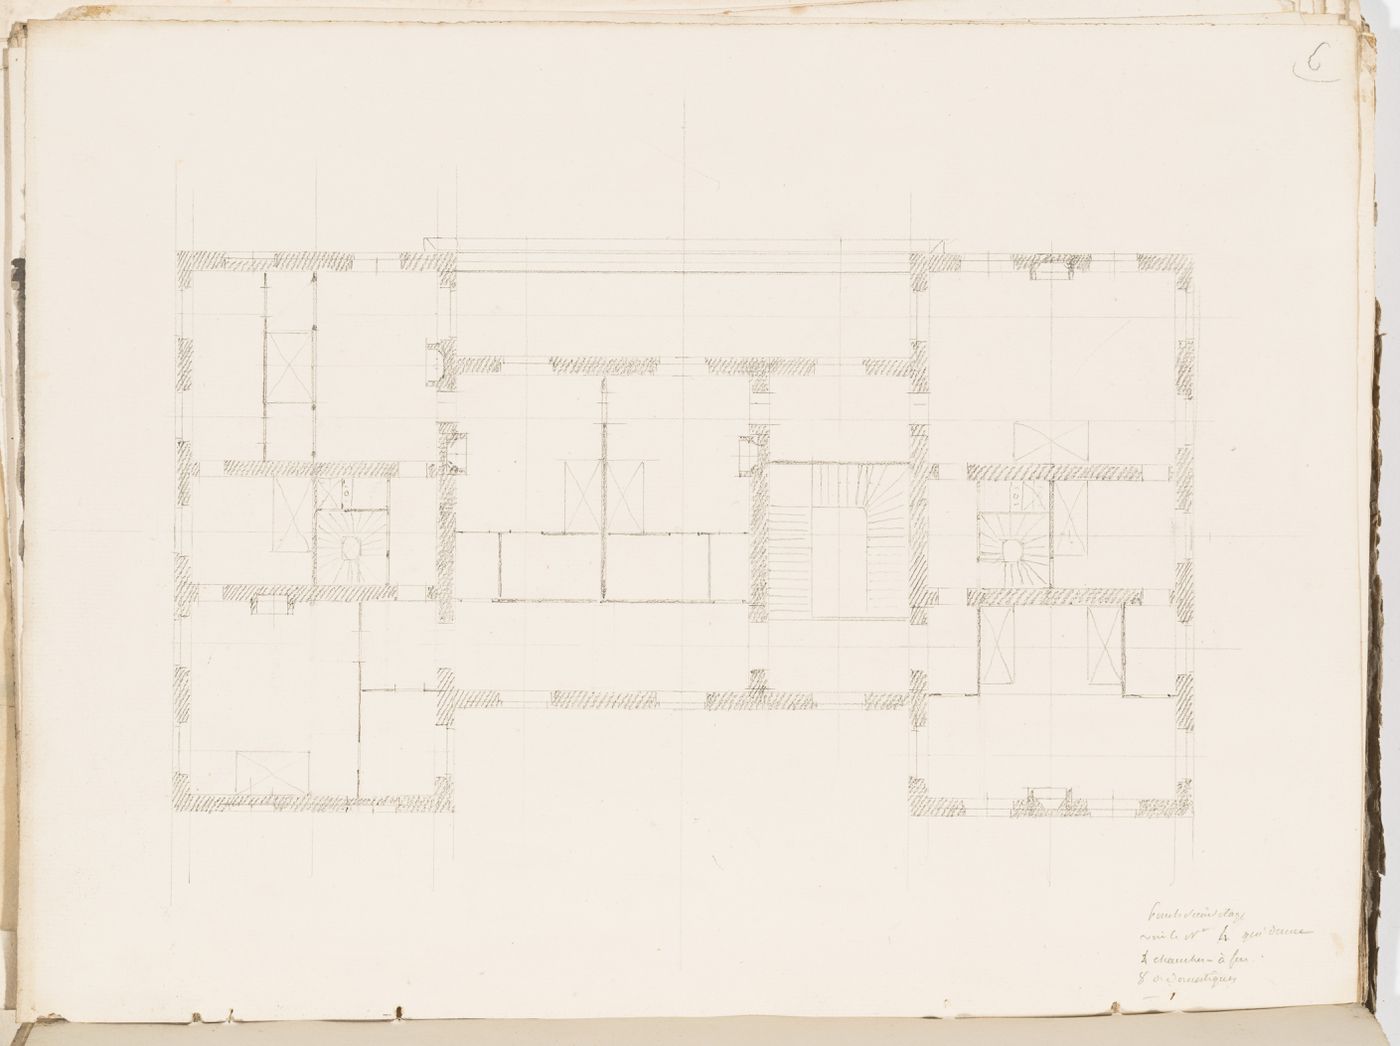 Project no. 6 for a country house for comte Treilhard: First floor plan